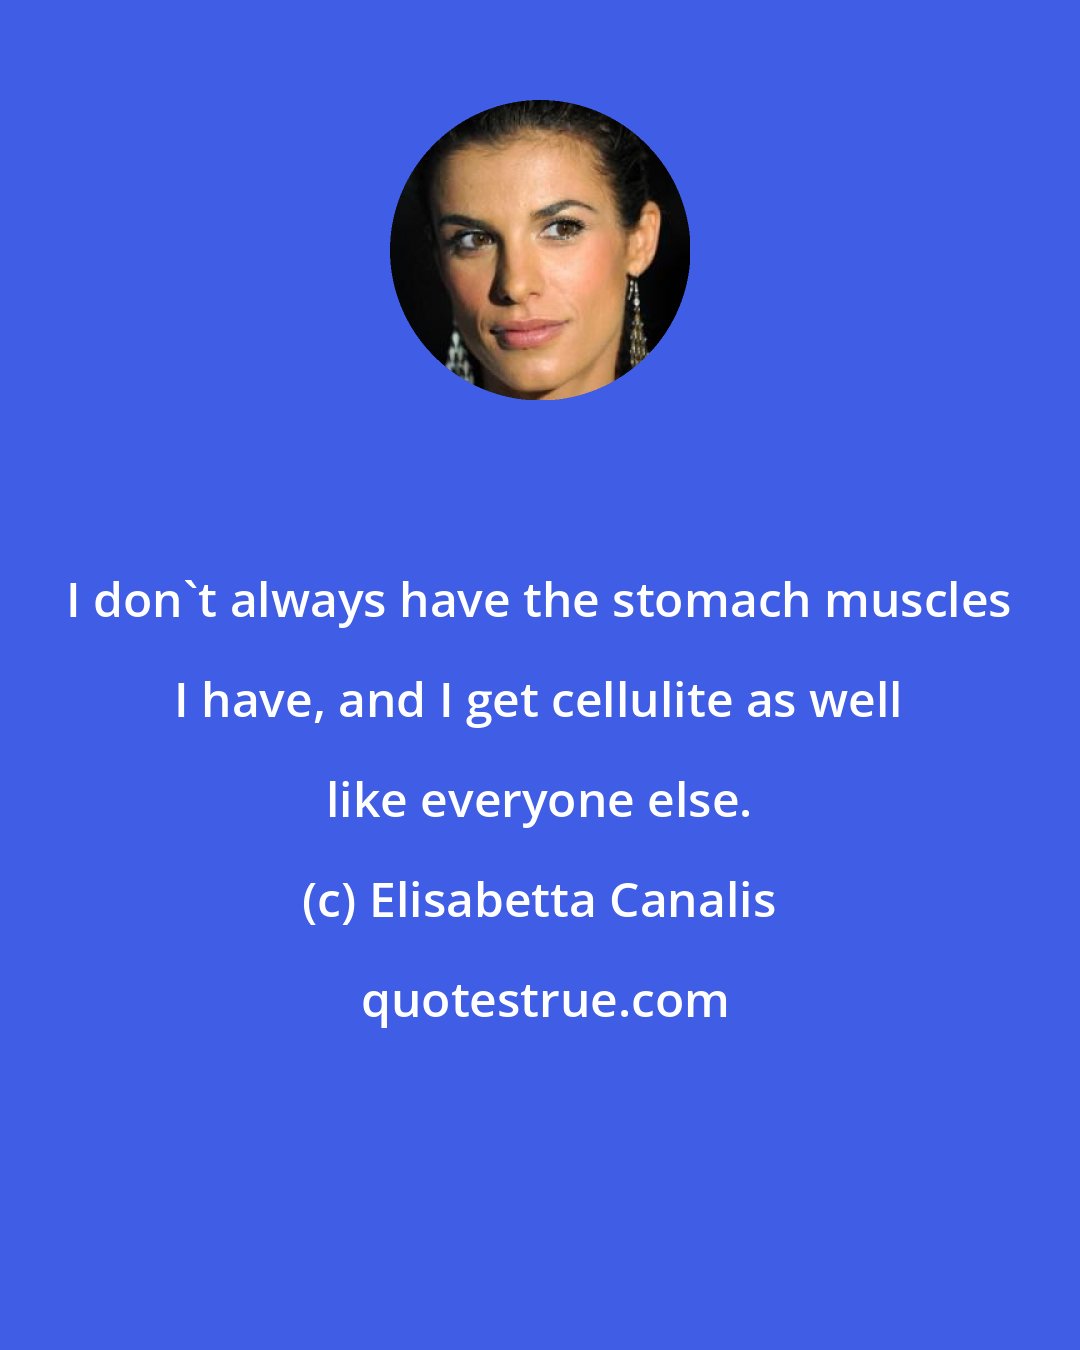 Elisabetta Canalis: I don't always have the stomach muscles I have, and I get cellulite as well like everyone else.